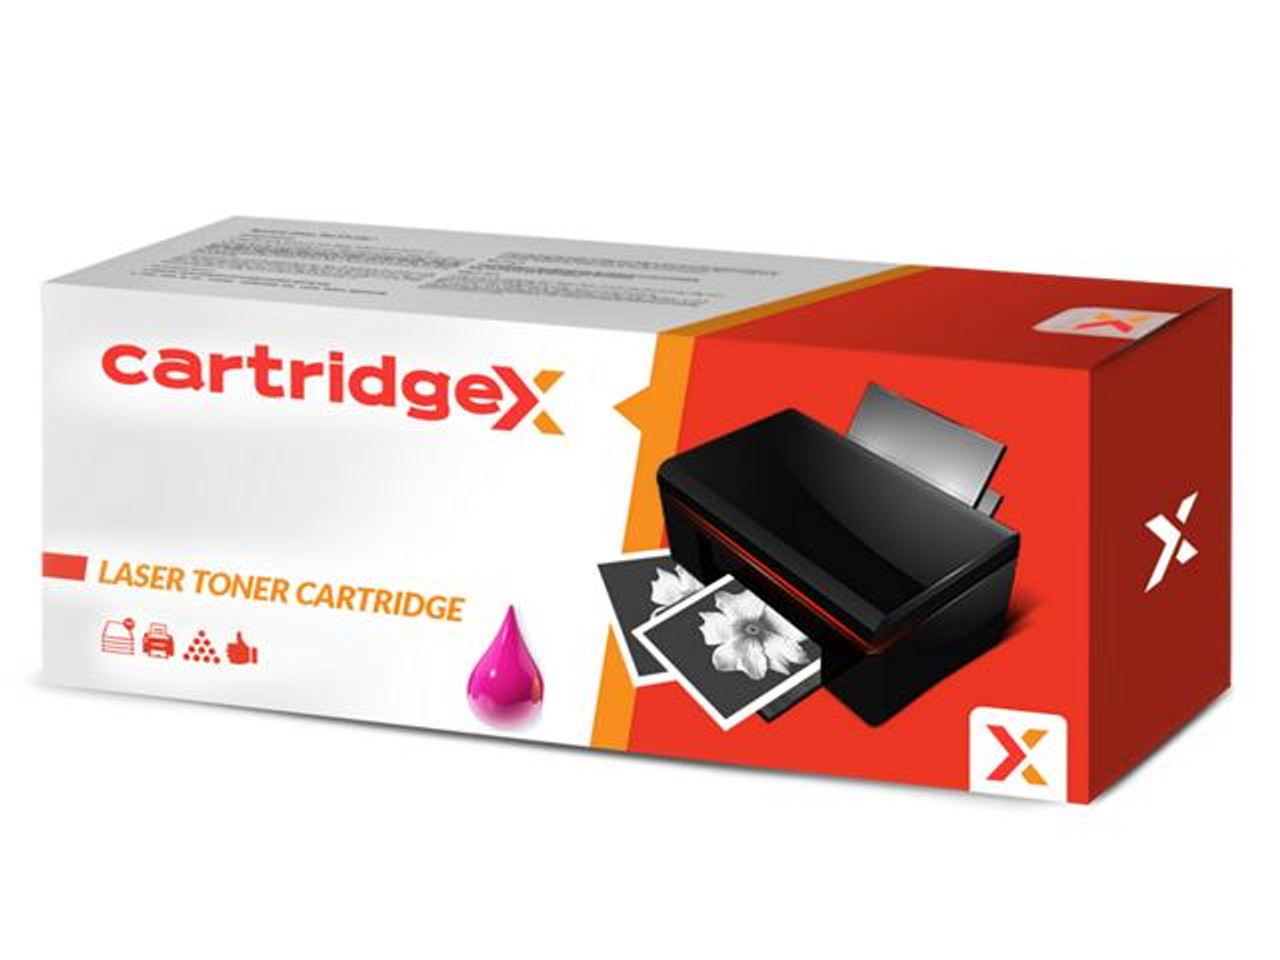 Compatible Magenta Toner Cartridge For Xerox Phaser 7400n,7400dn,7400dt,7400dx,7400dxf